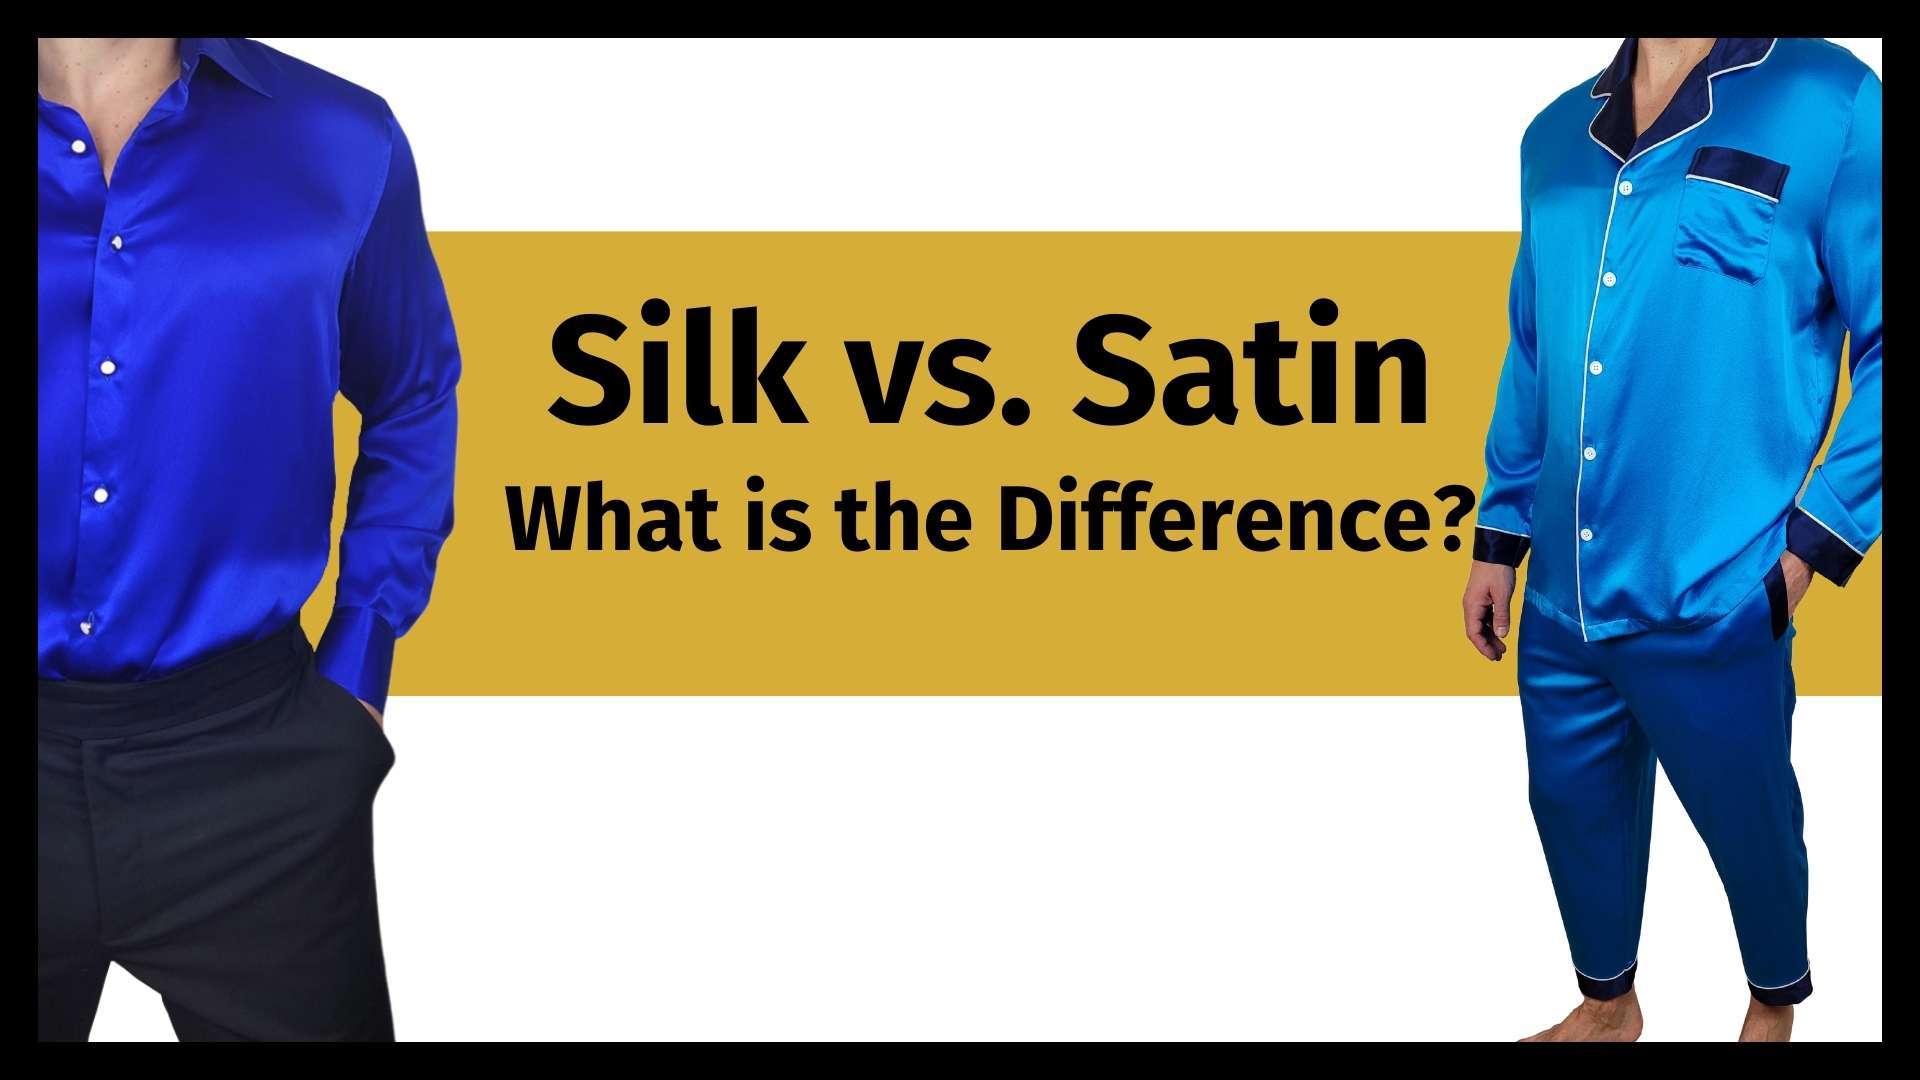 silk vs satin banner image with a photo of two men wearing both satin as well as silk clothing